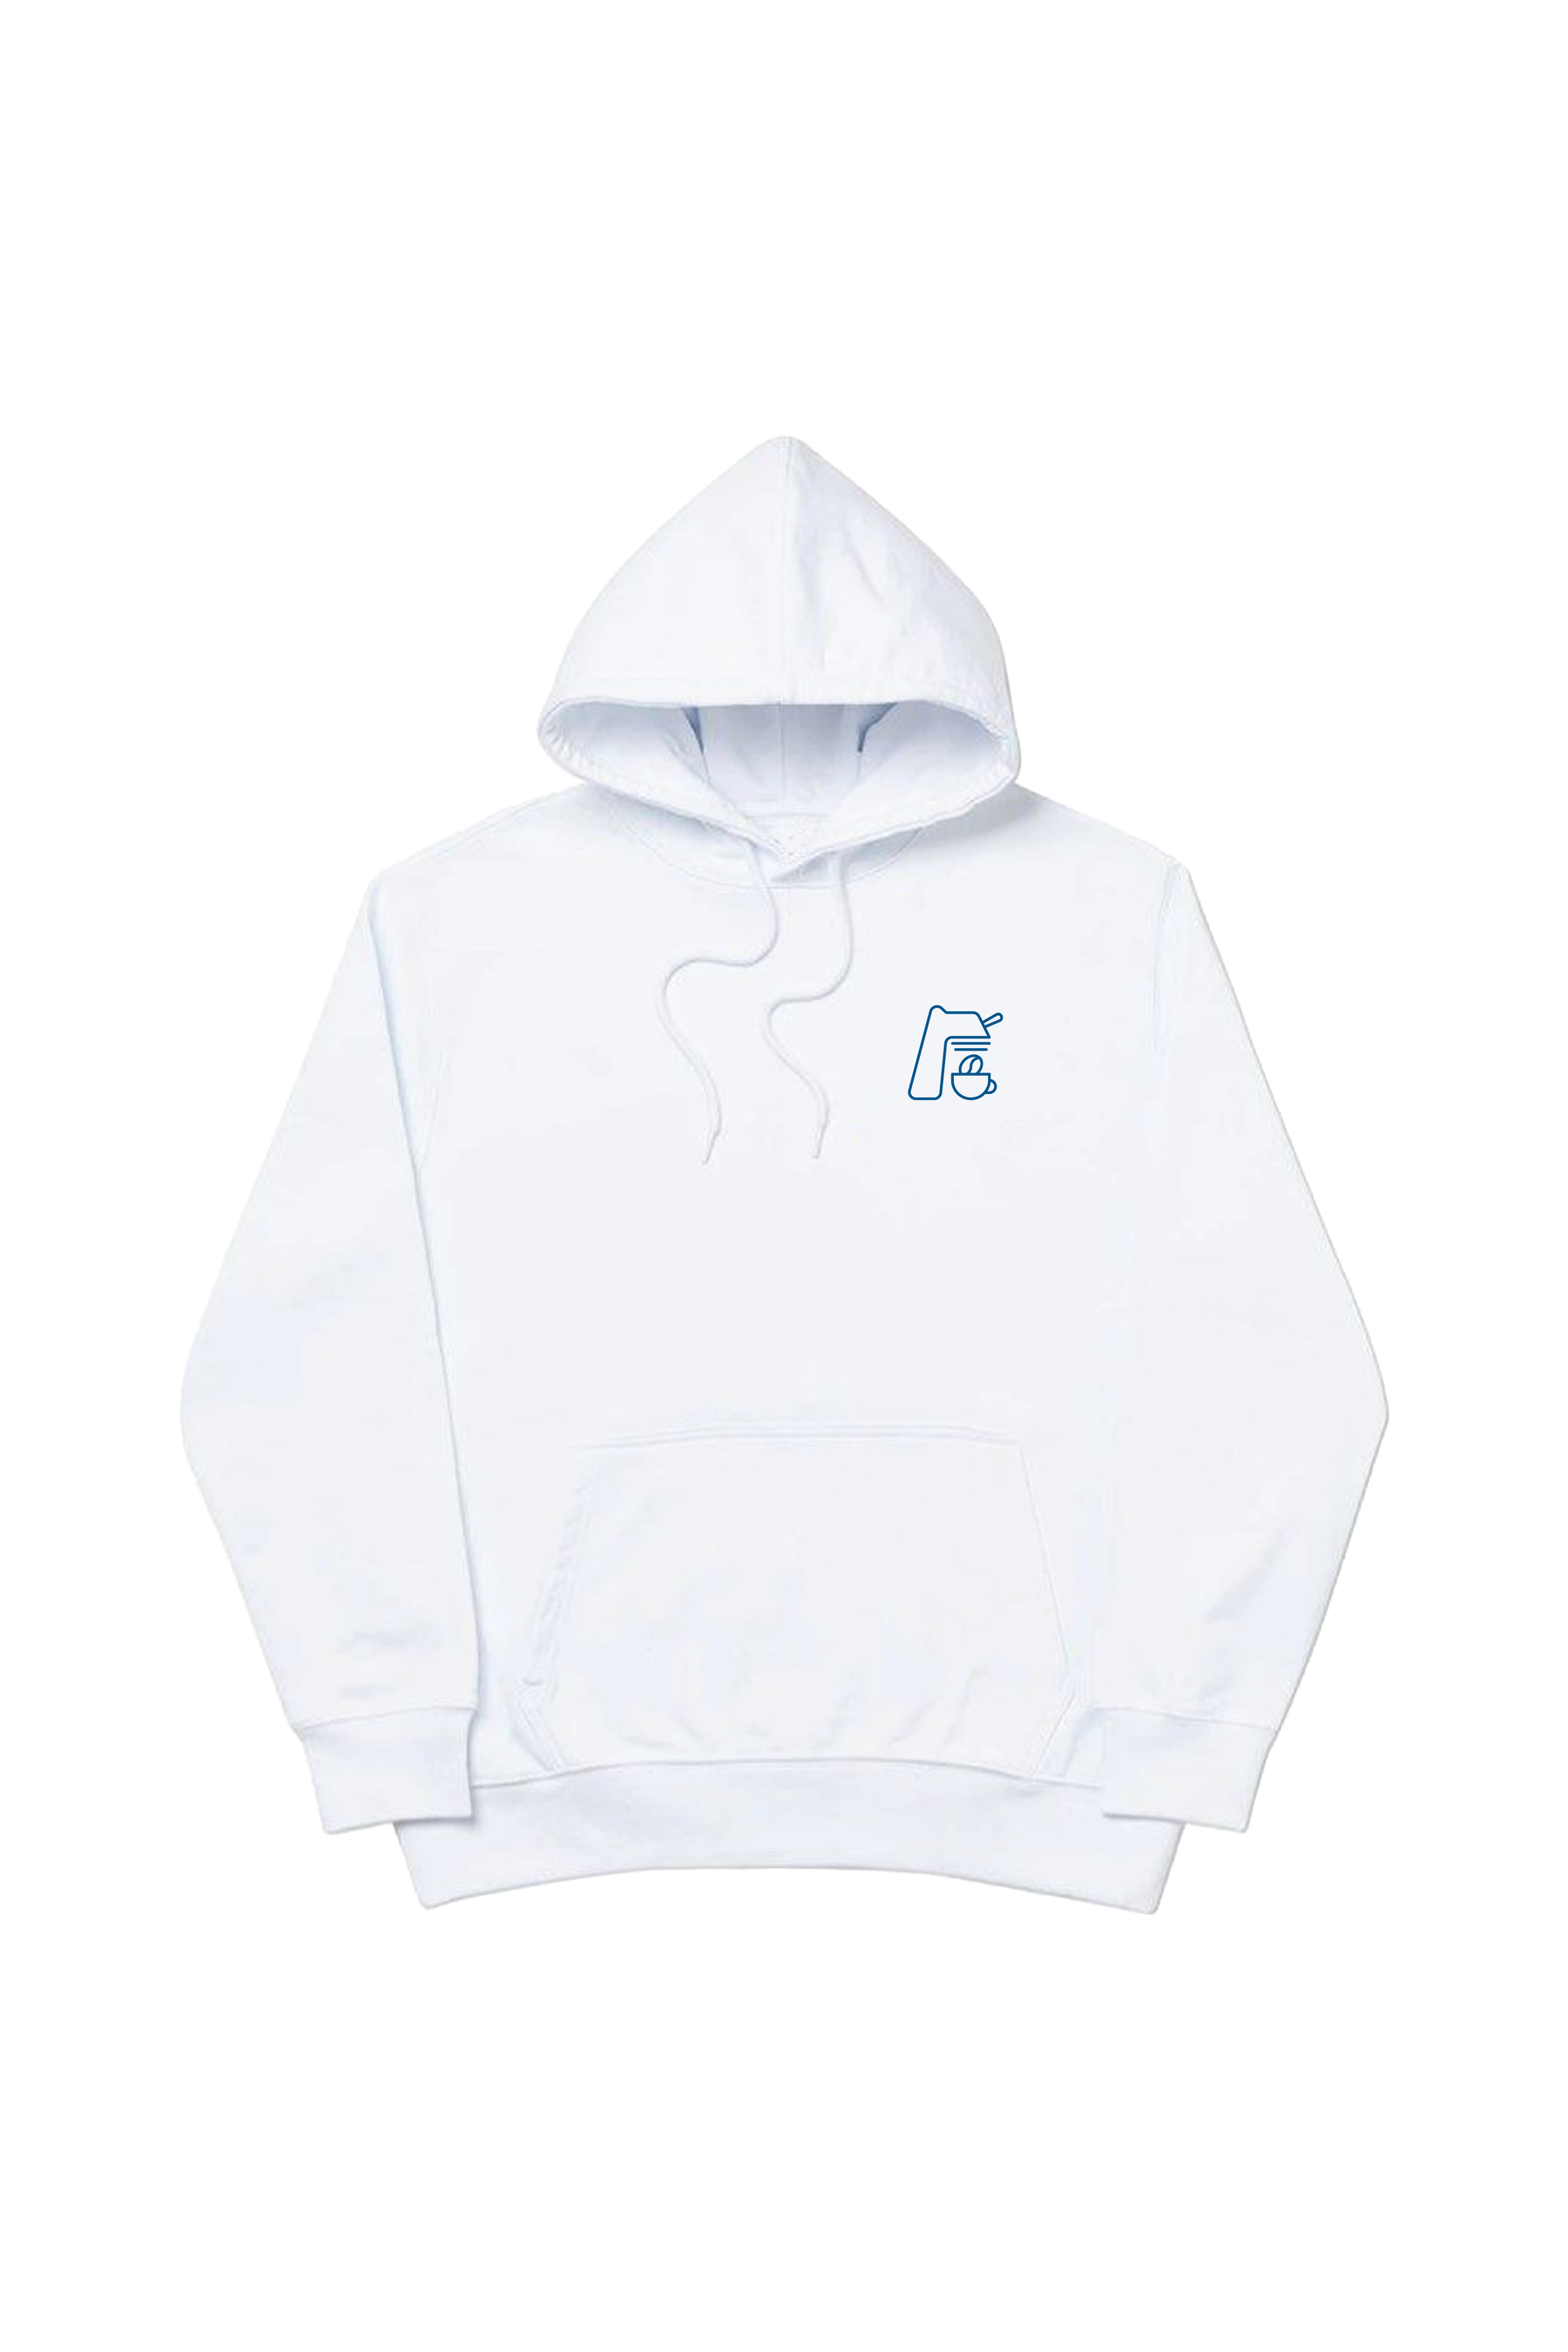 Whats On Tap Hoodie